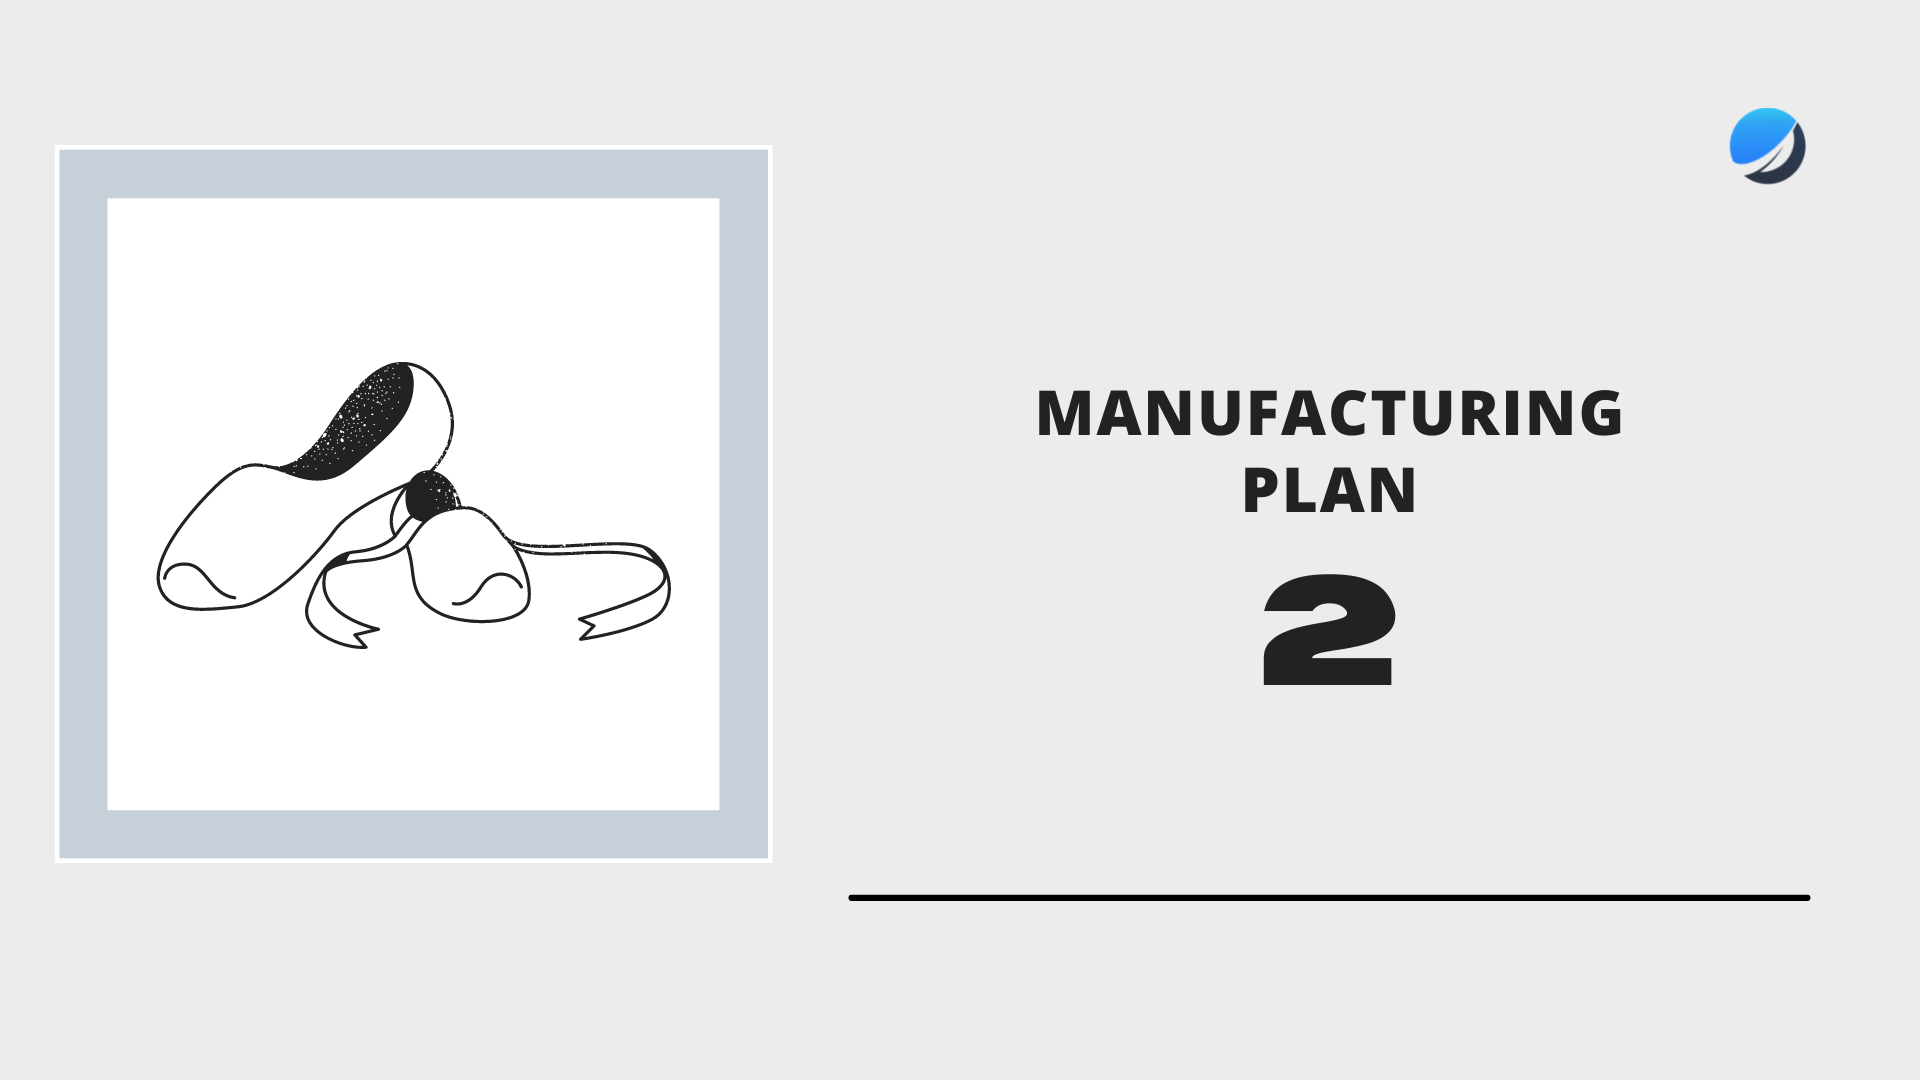 Manufacturing Plan for shoe brand